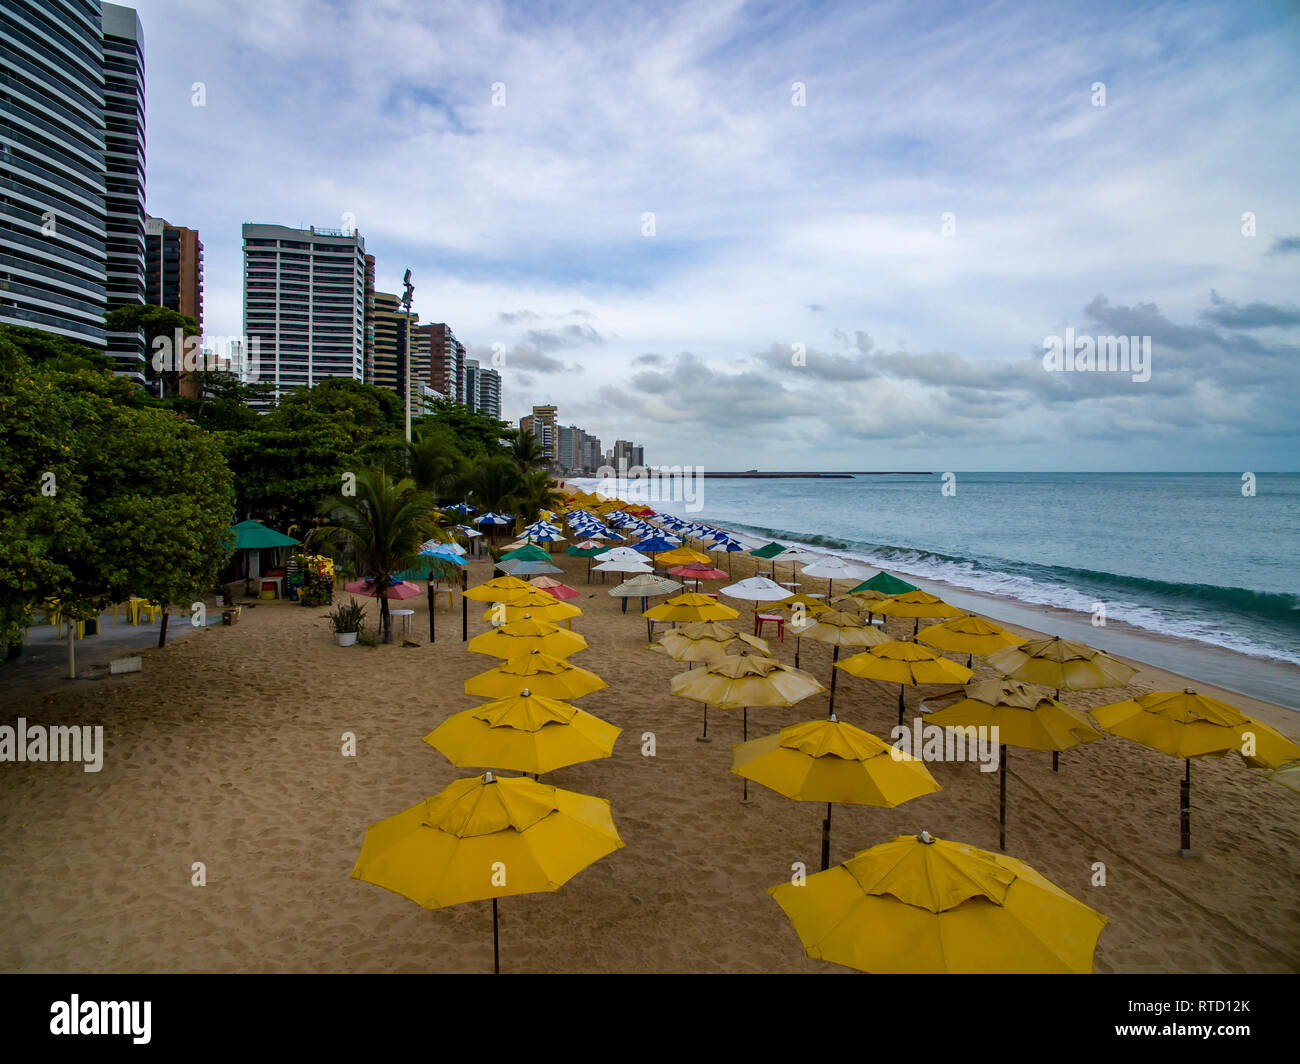 Travel memories of the city of Fortaleza, state of Ceara Brazil South America. Stock Photo